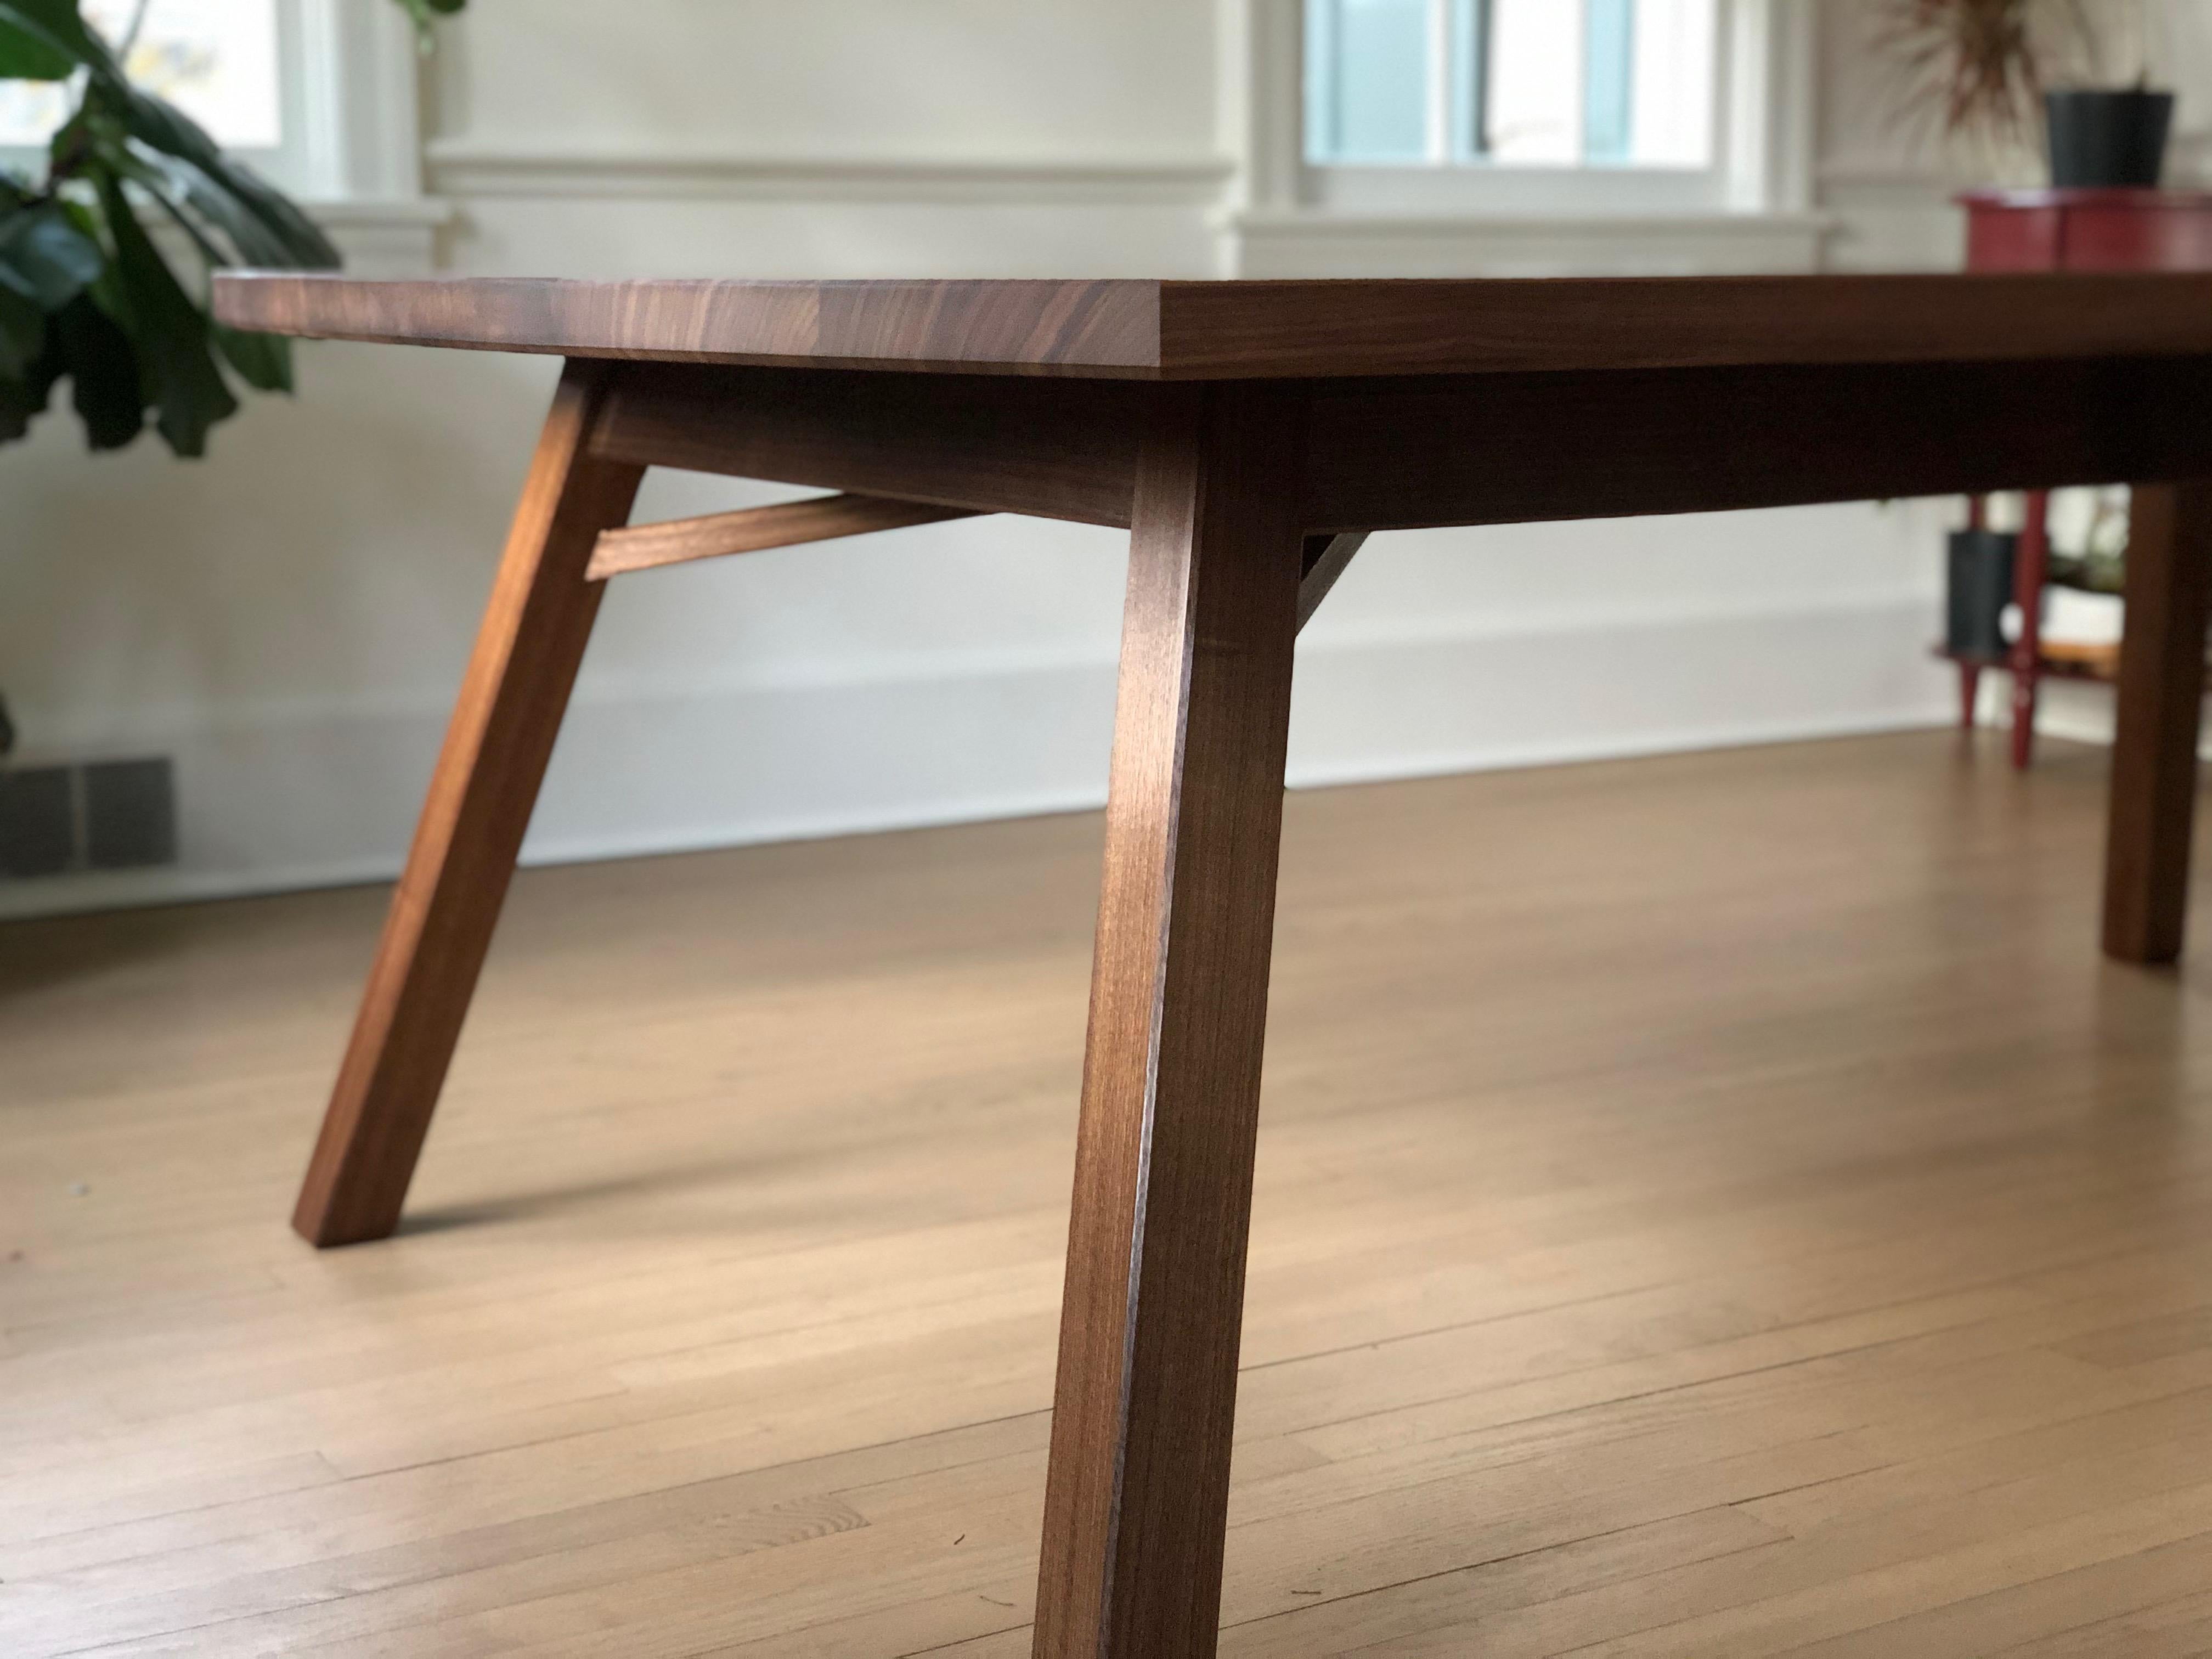 This dining table takes inspiration from the traditional Japanese bell tower in its use of a splayed leg structure that appears to feature square section legs. Upon closer inspection one realizes that the legs are a parallelogram shape, unique to